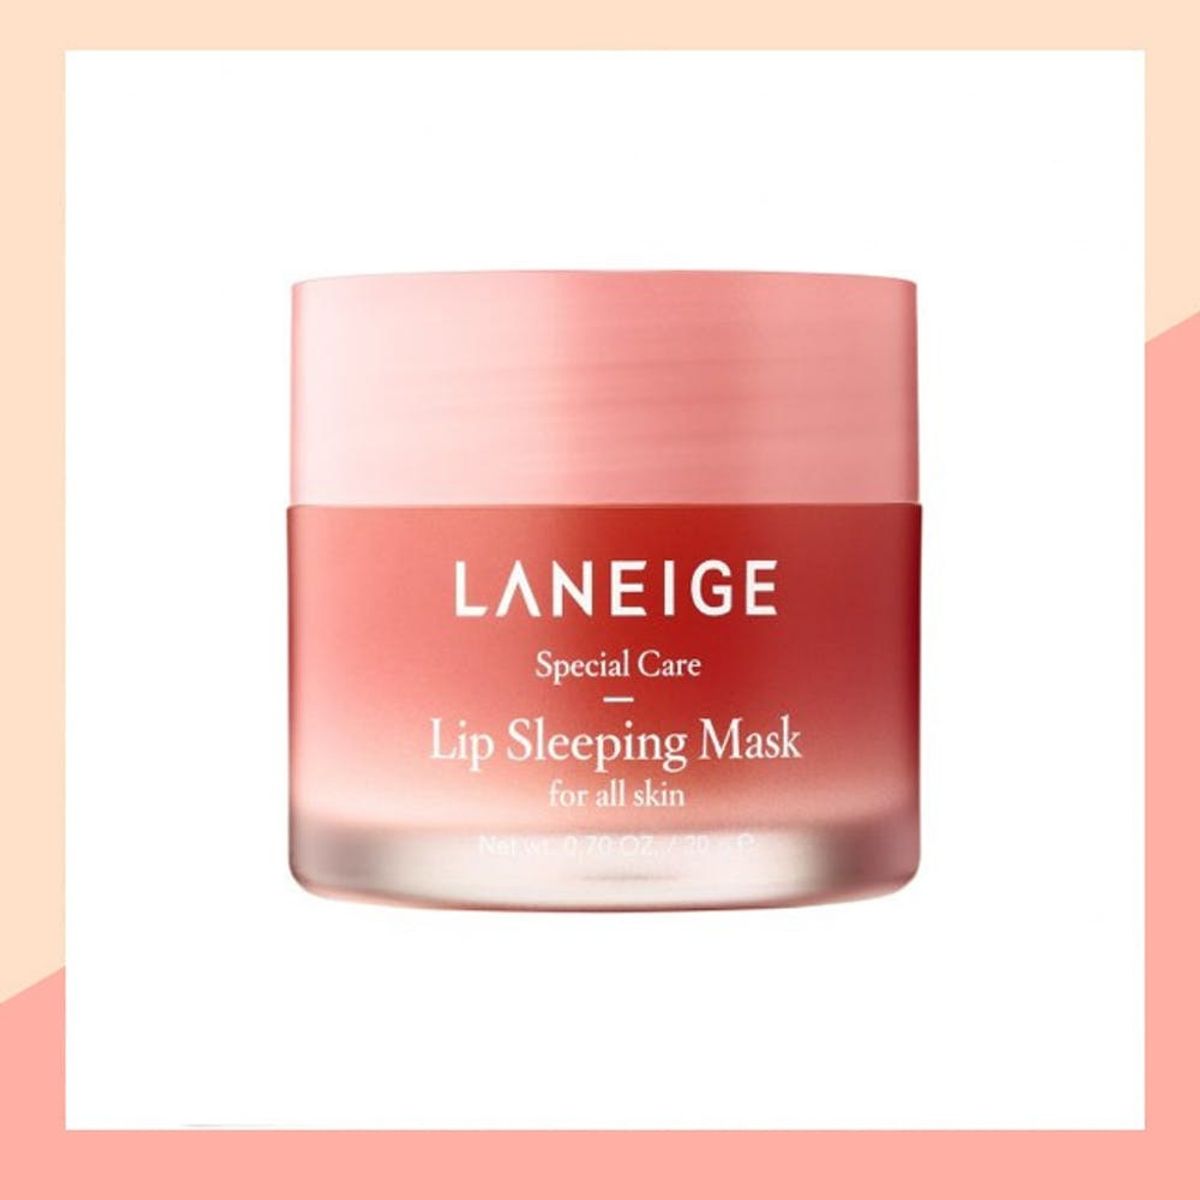 7 Lip Hydrating Products That Are Worth Every Penny